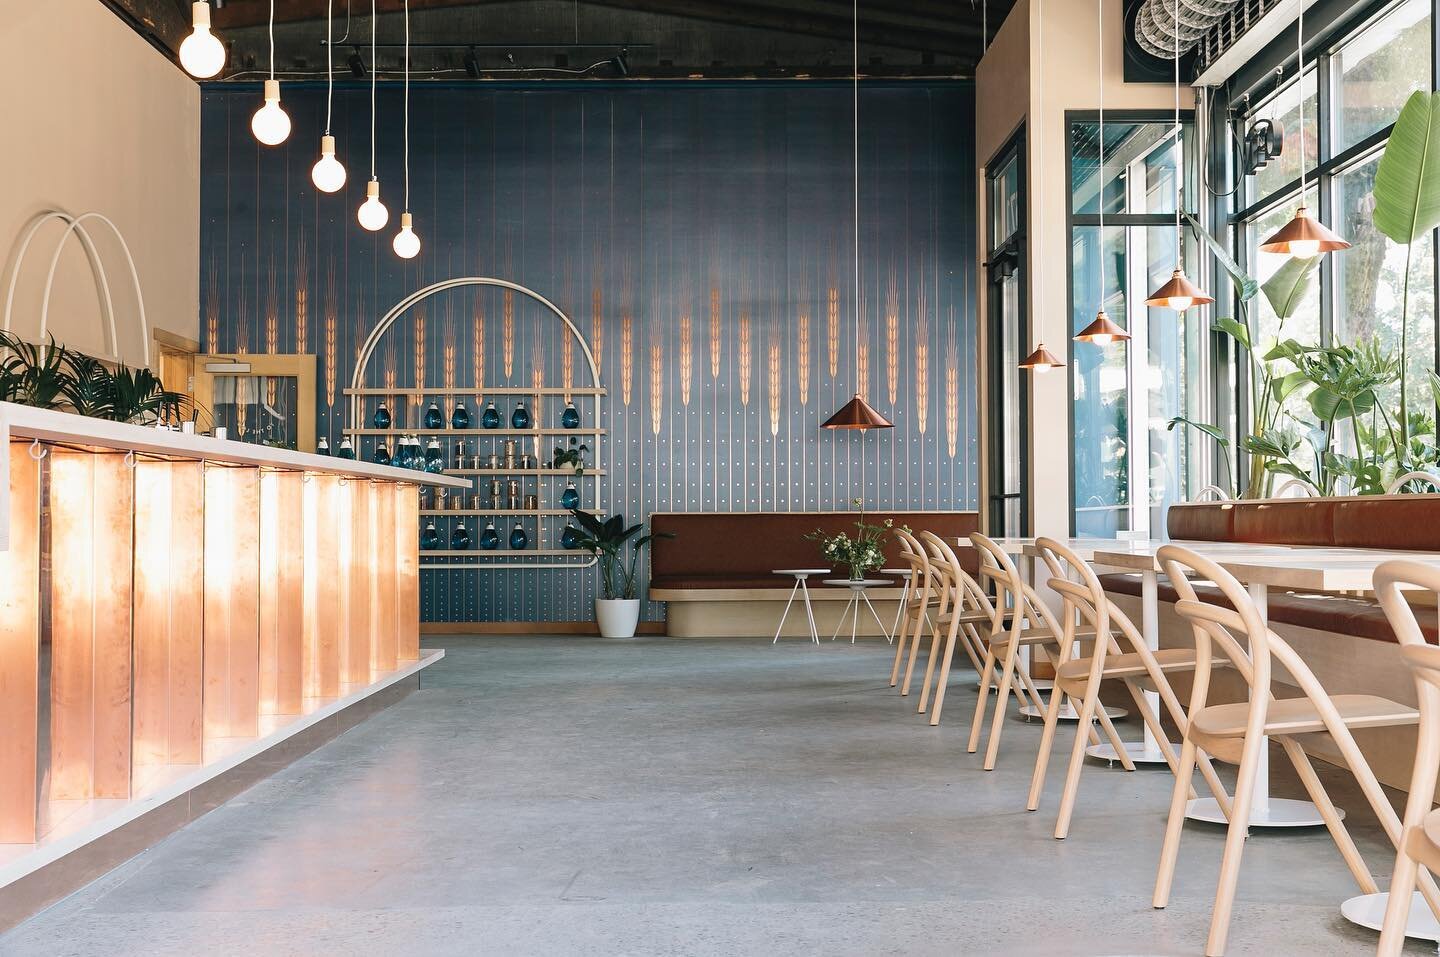 A look at the sawtooth copper-clad bar and copper light fixtures at the @freelandspirits tasting room in Portland, OR.
📸 by&nbsp;@vg___2
&bull; 
&bull; 
&bull; 
&bull; 
&bull; 
#interiordesign&nbsp;#interiorinspiration&nbsp;#moderninteriordesign&nbs